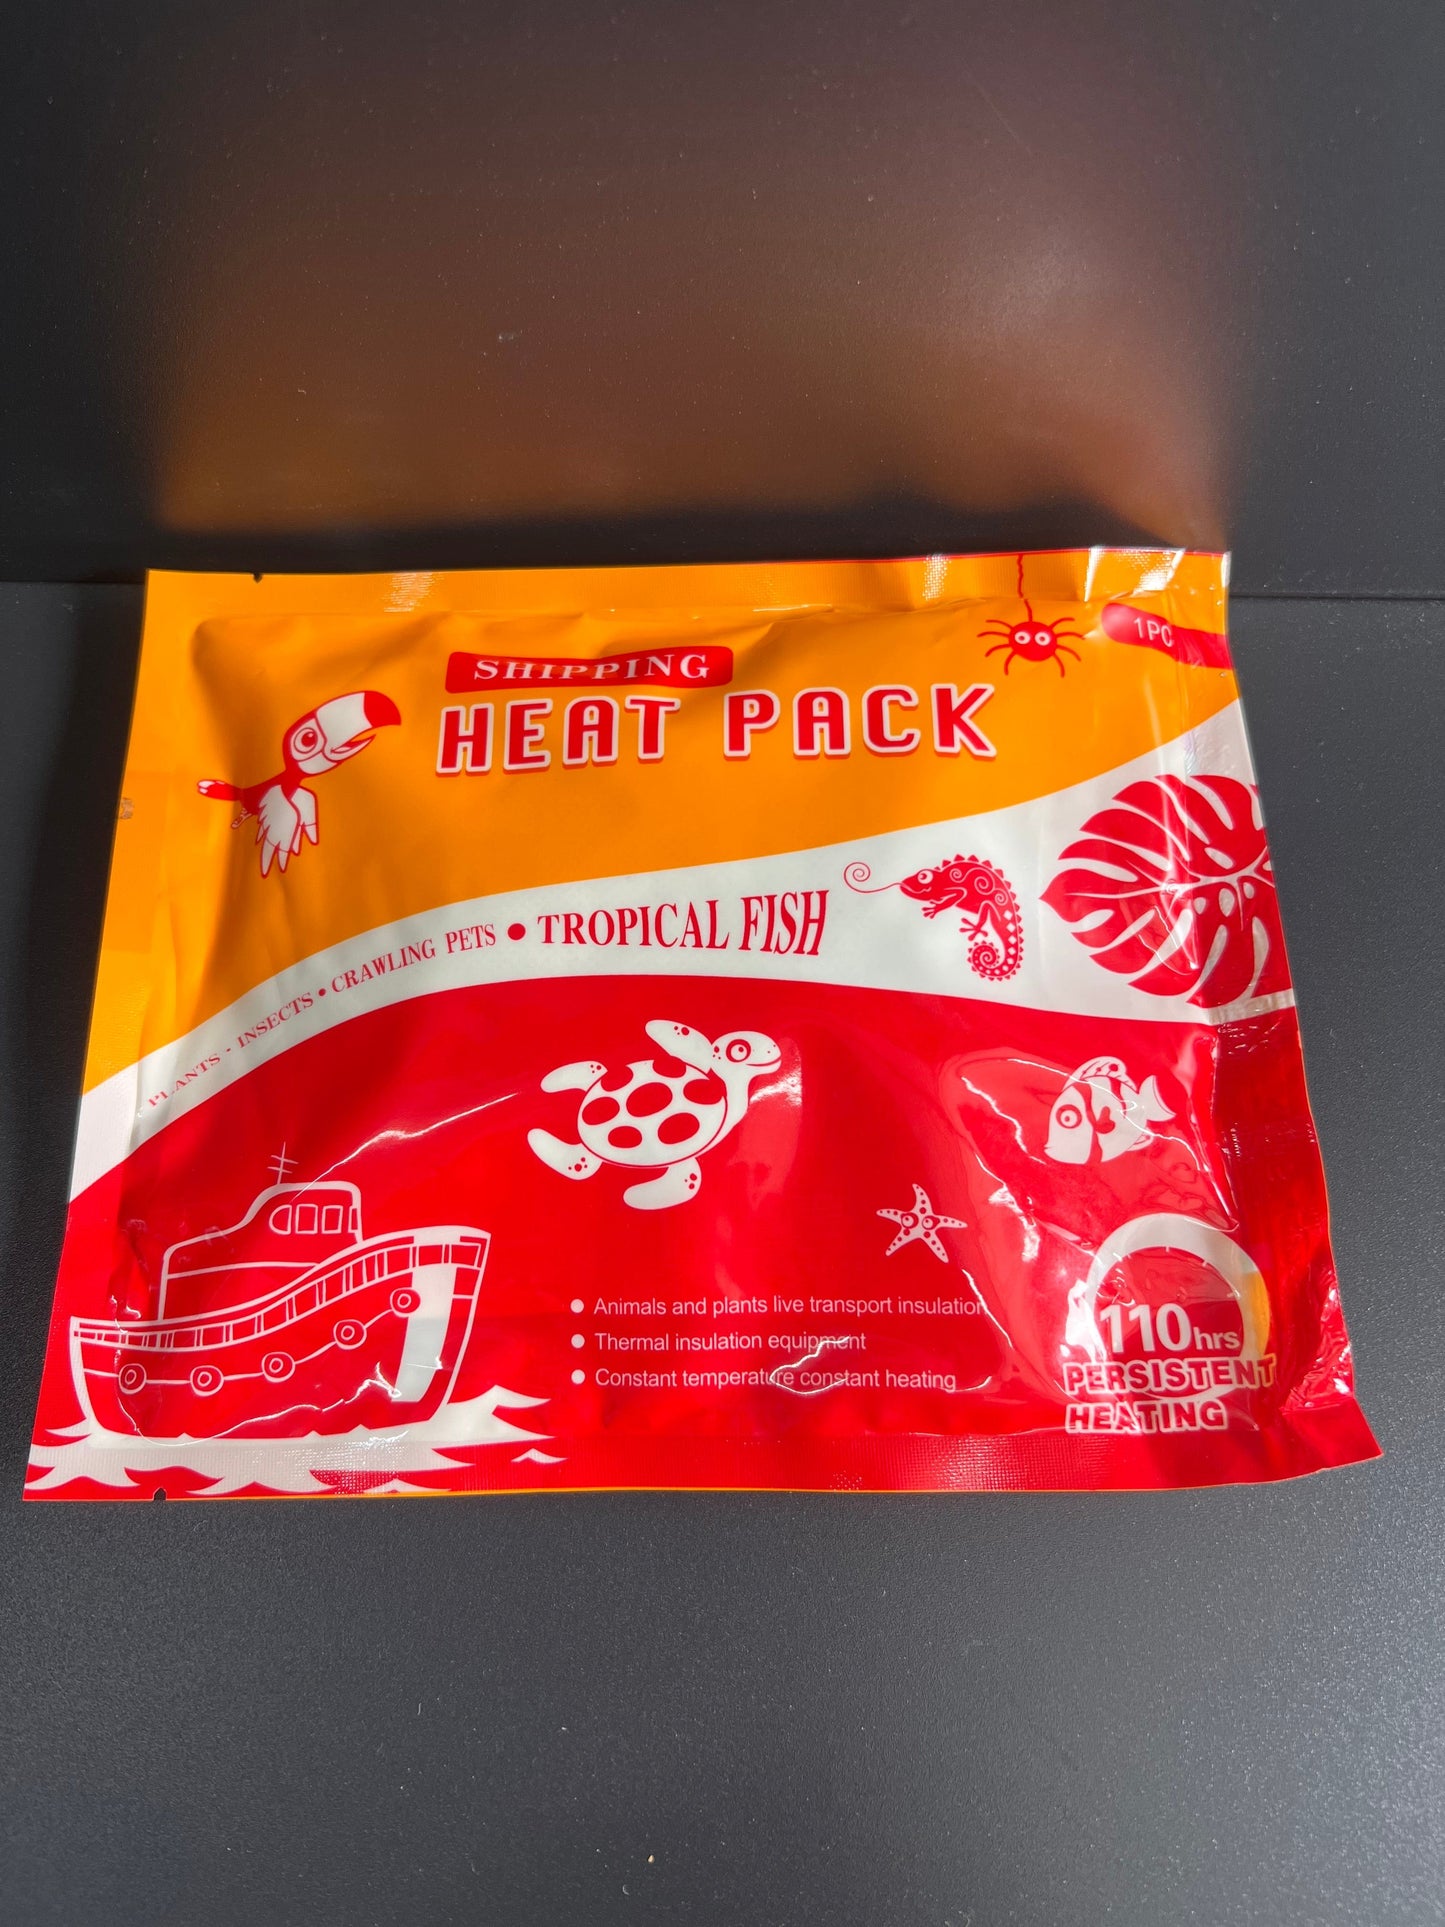 Shipping Heat Pack - 40hr, 72hr and 110hr